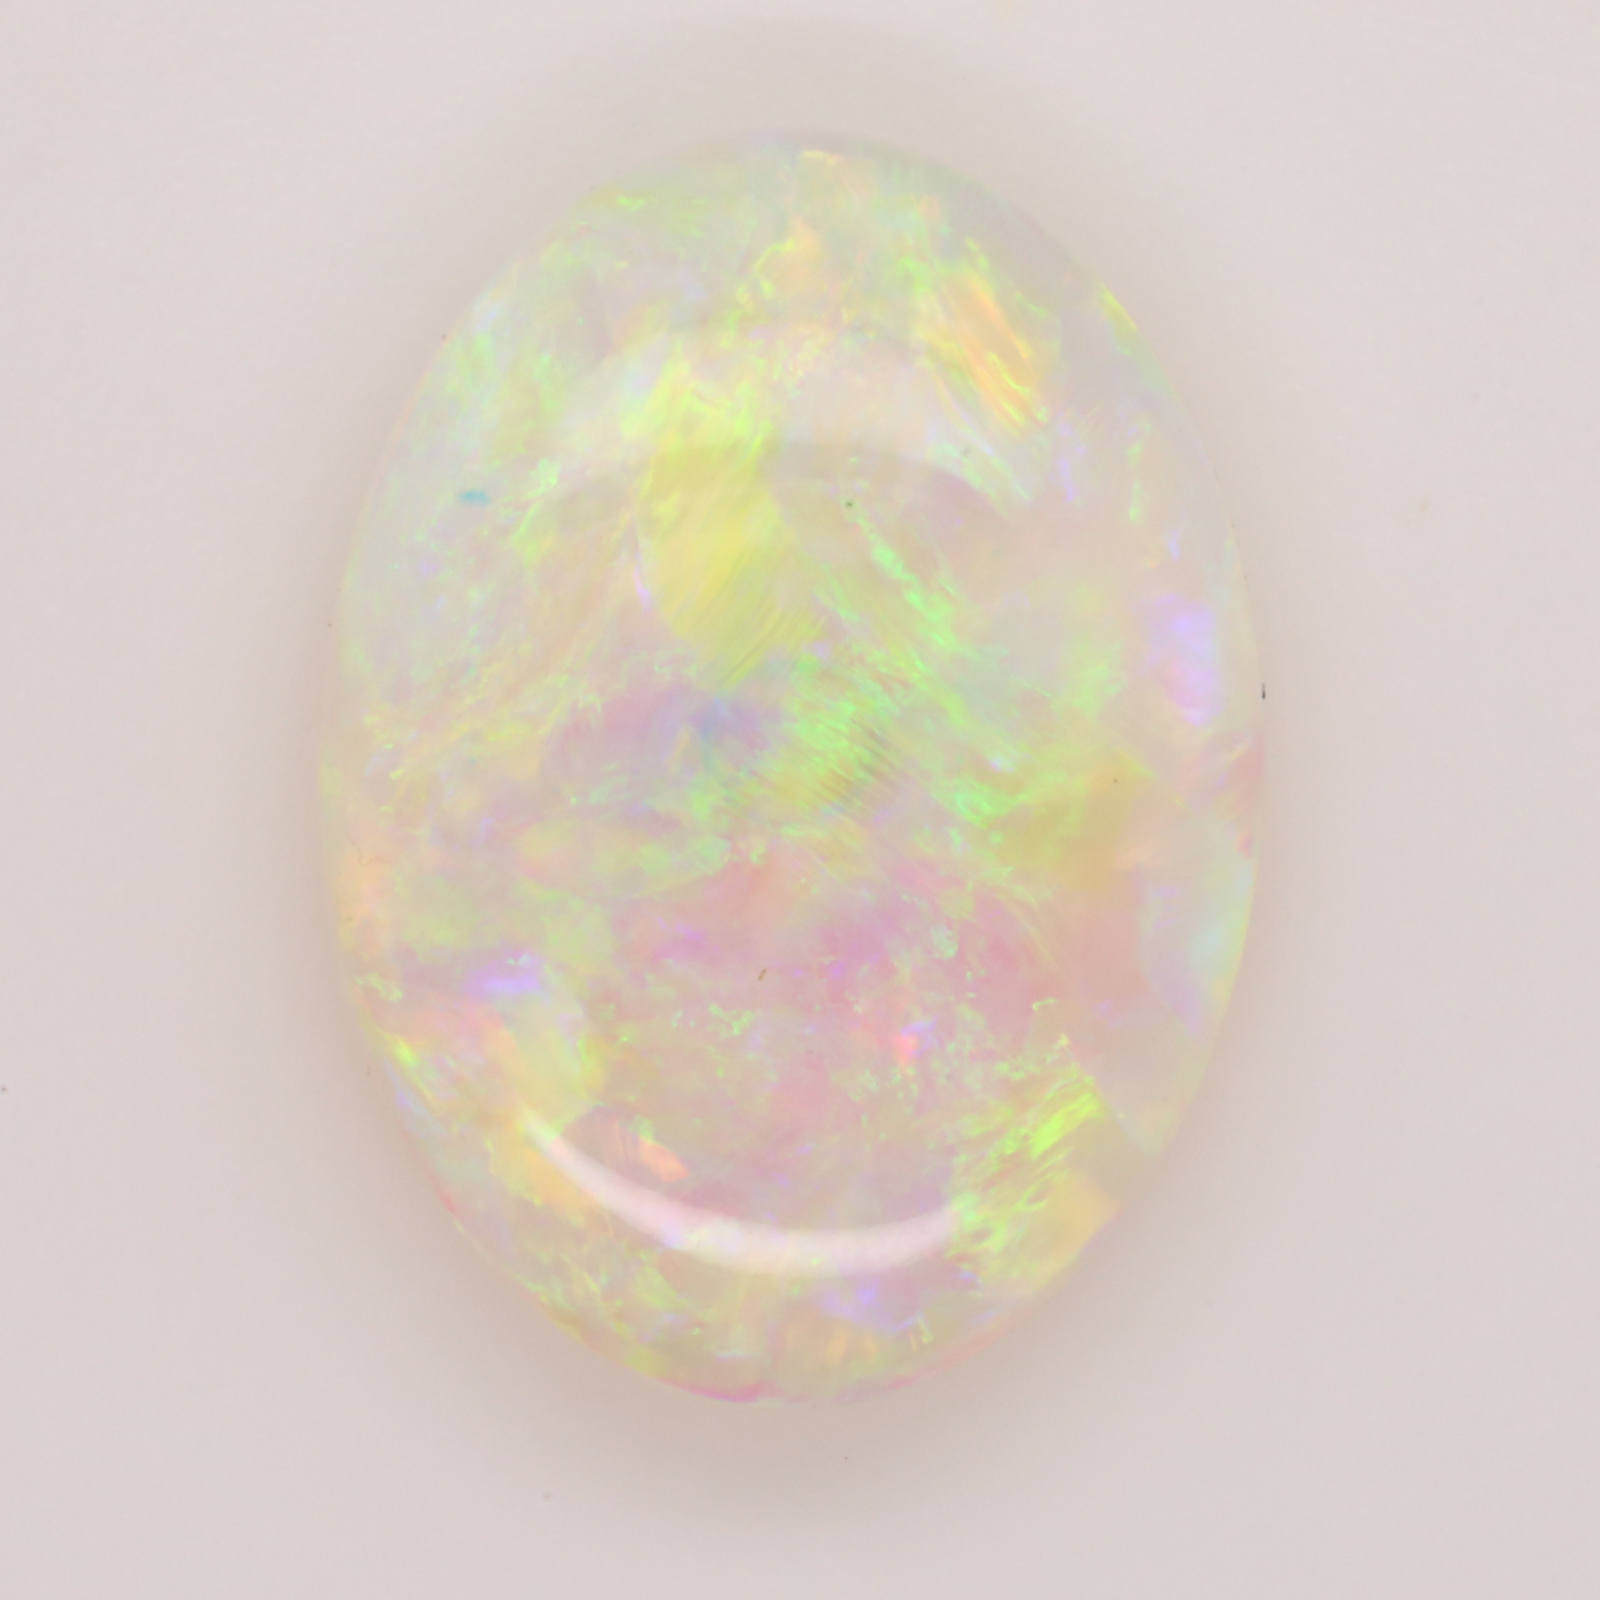 Blue, Yellow, Orange and Green Unset Solid Australian Crystal Opal